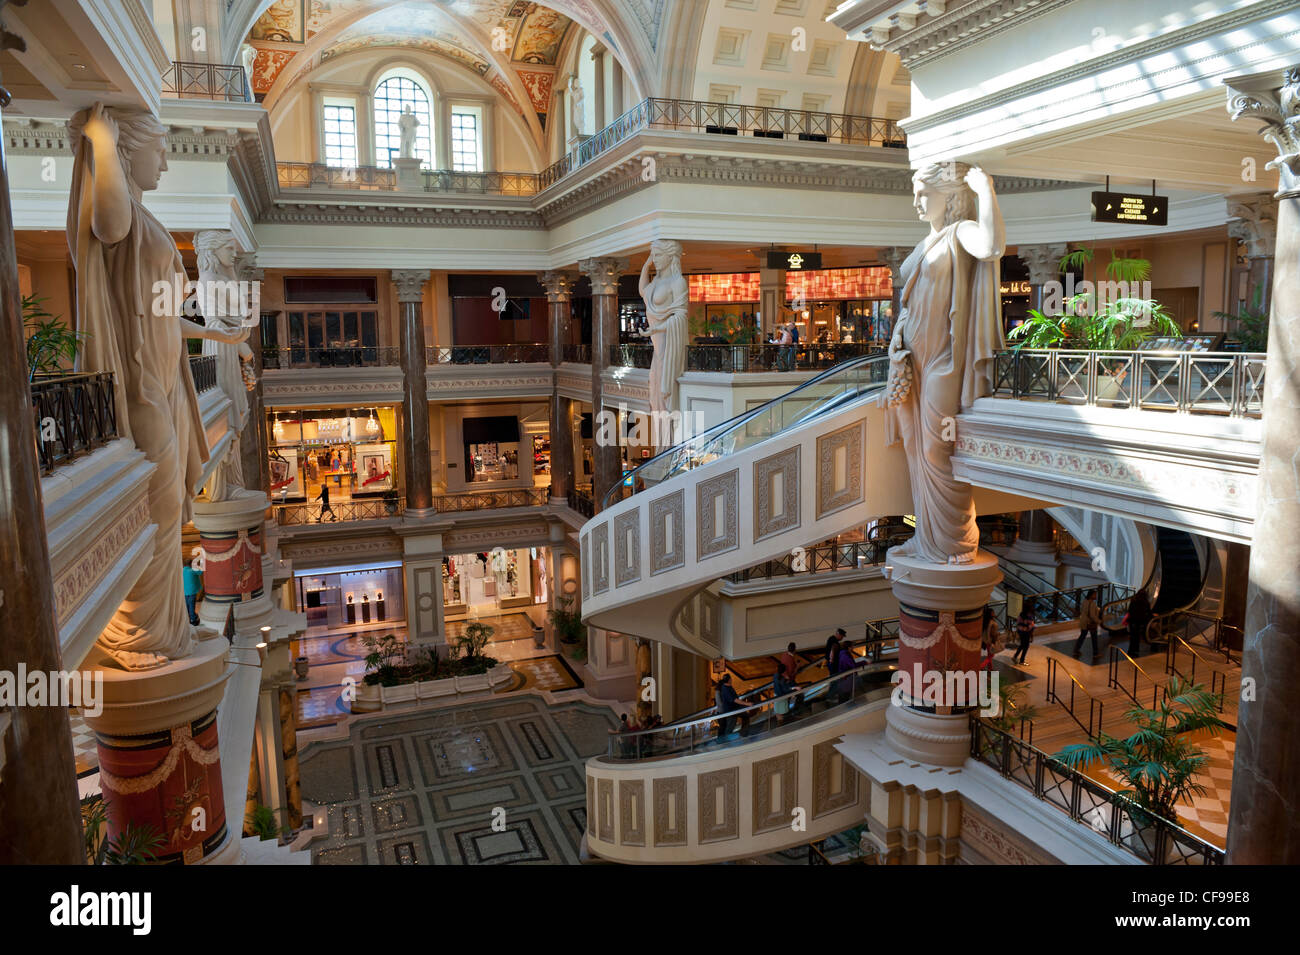 Inside The Forum Shops Luxury Shopping Mall at Caesars Palace, Las